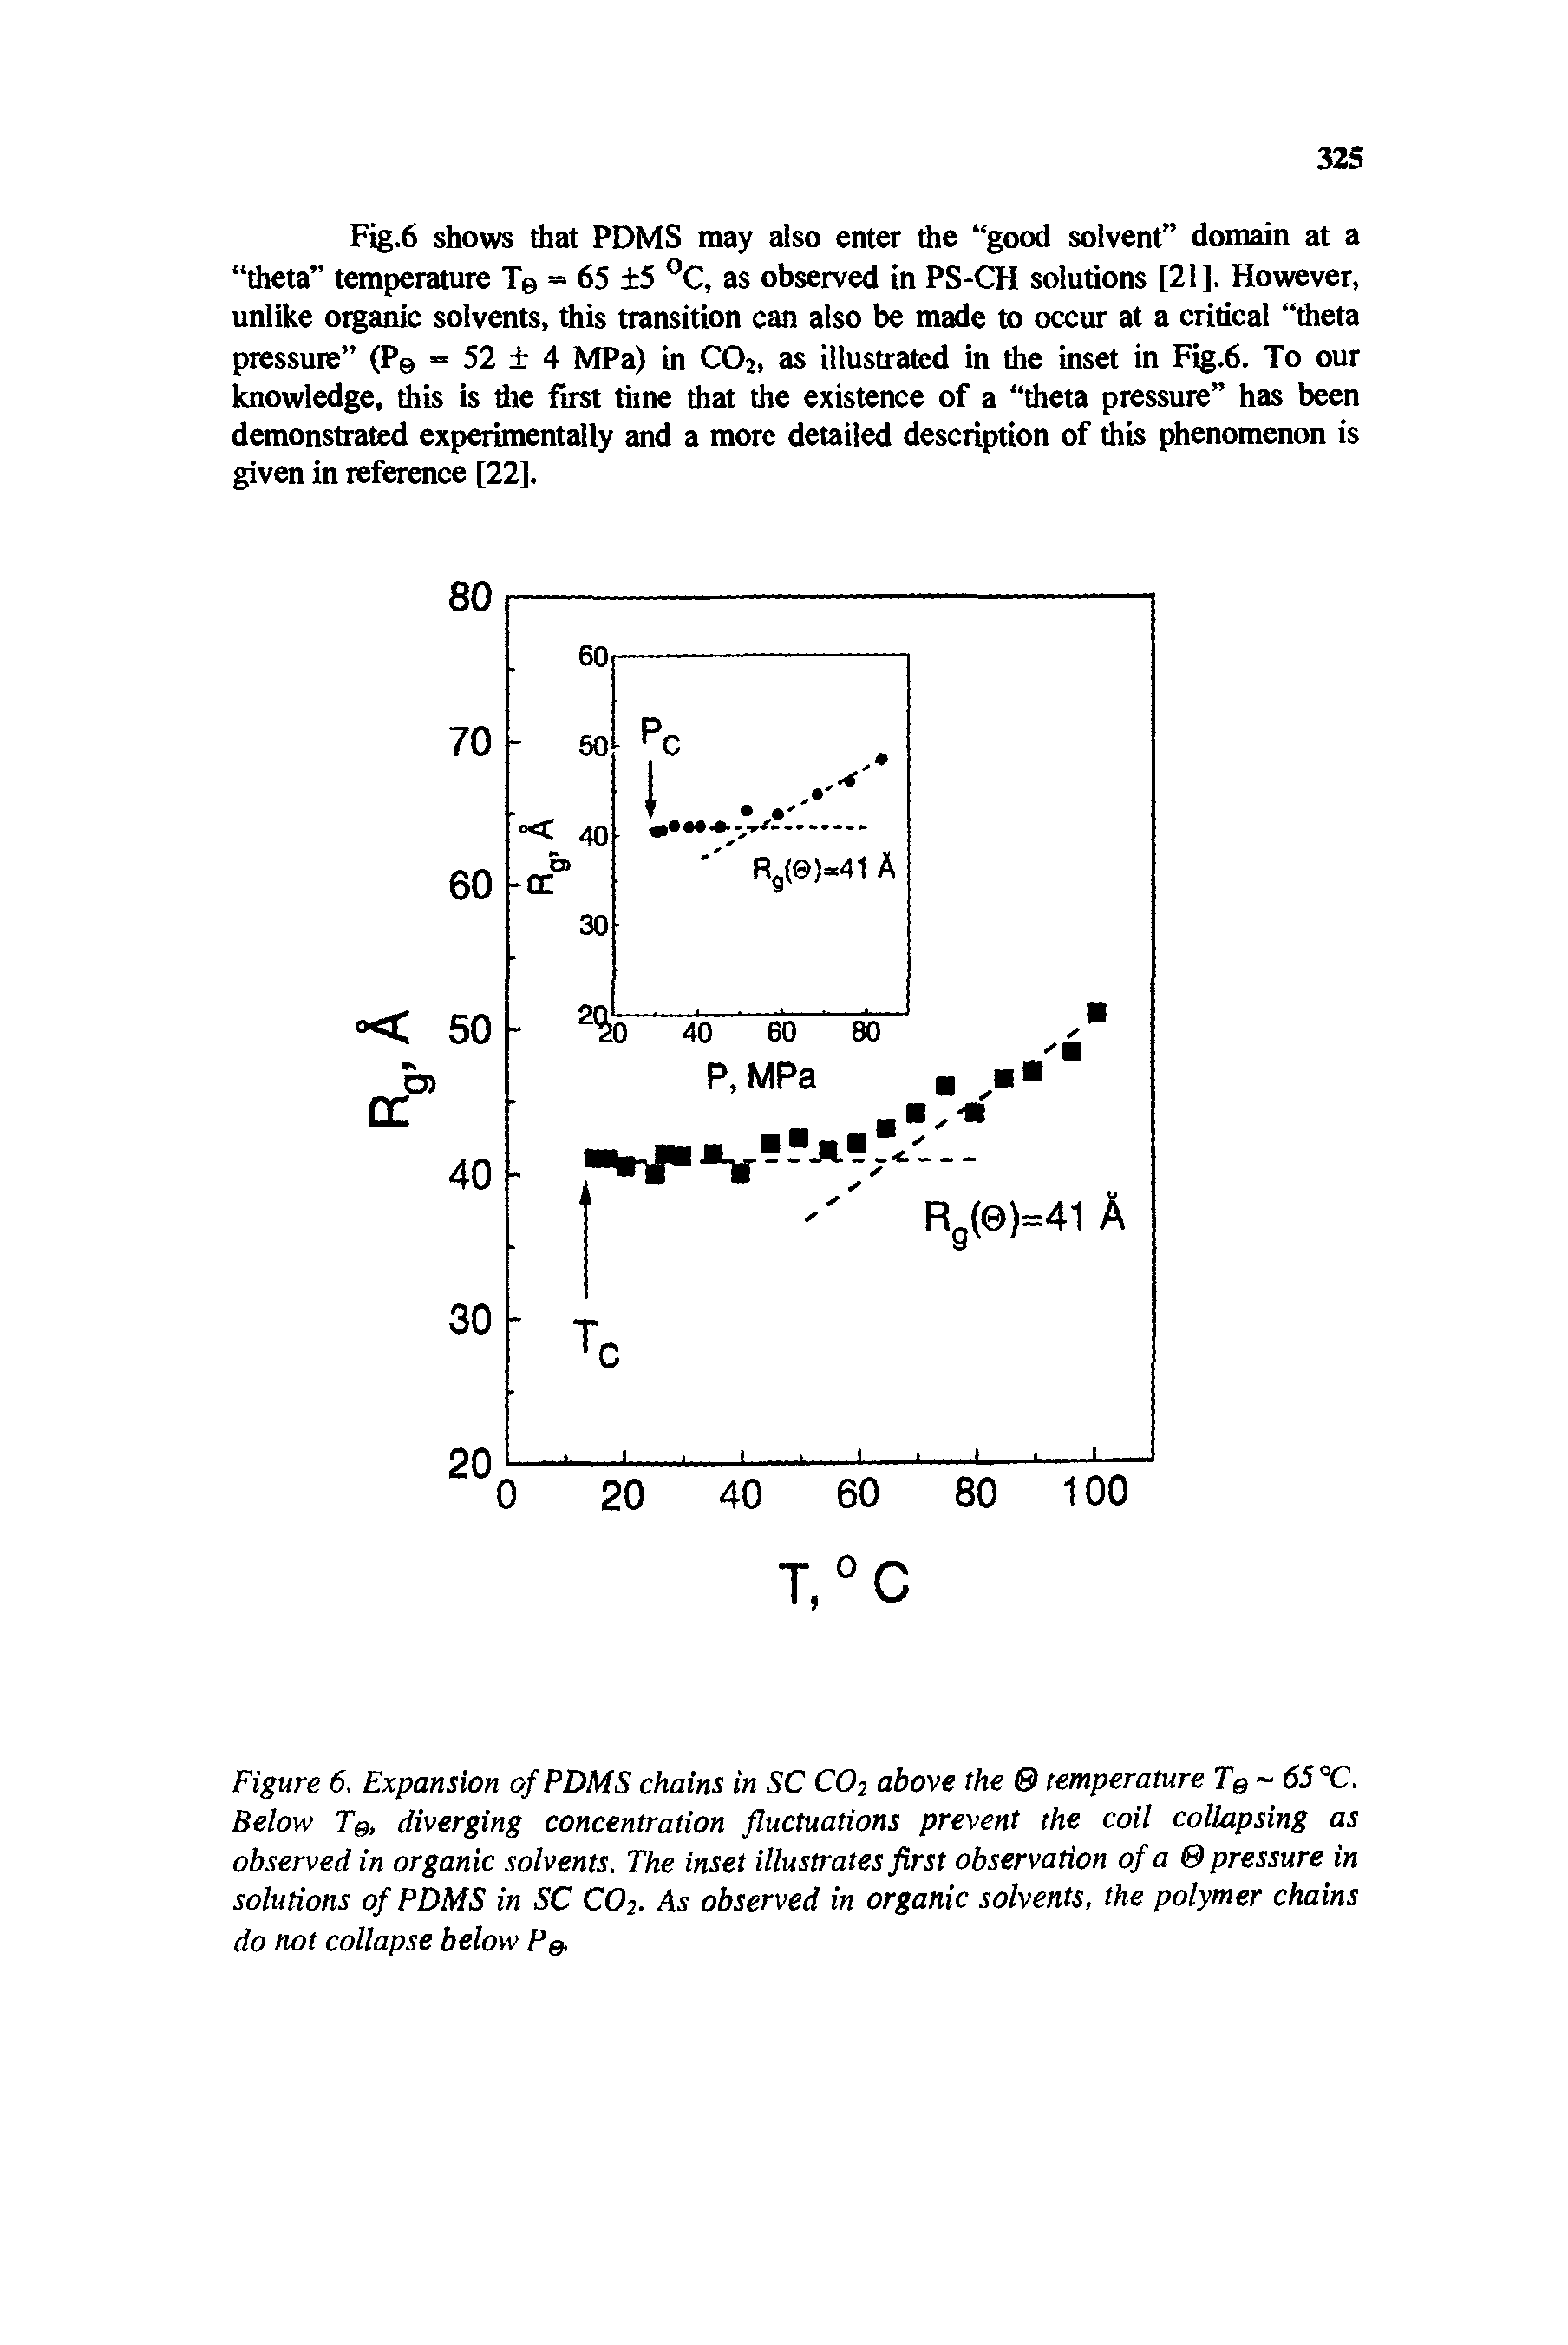 Figure 6. Expansion of PDMS chains in SC CO2 above the temperature Tg 65 °C. Below Tg, diverging concentration fluctuations prevent the coil collapsing as observed in organic solvents. The inset illustrates first observation of a pressure in solutions of PDMS in SC CO2. As observed in organic solvents, the polymer chains do not collapse below Pg.